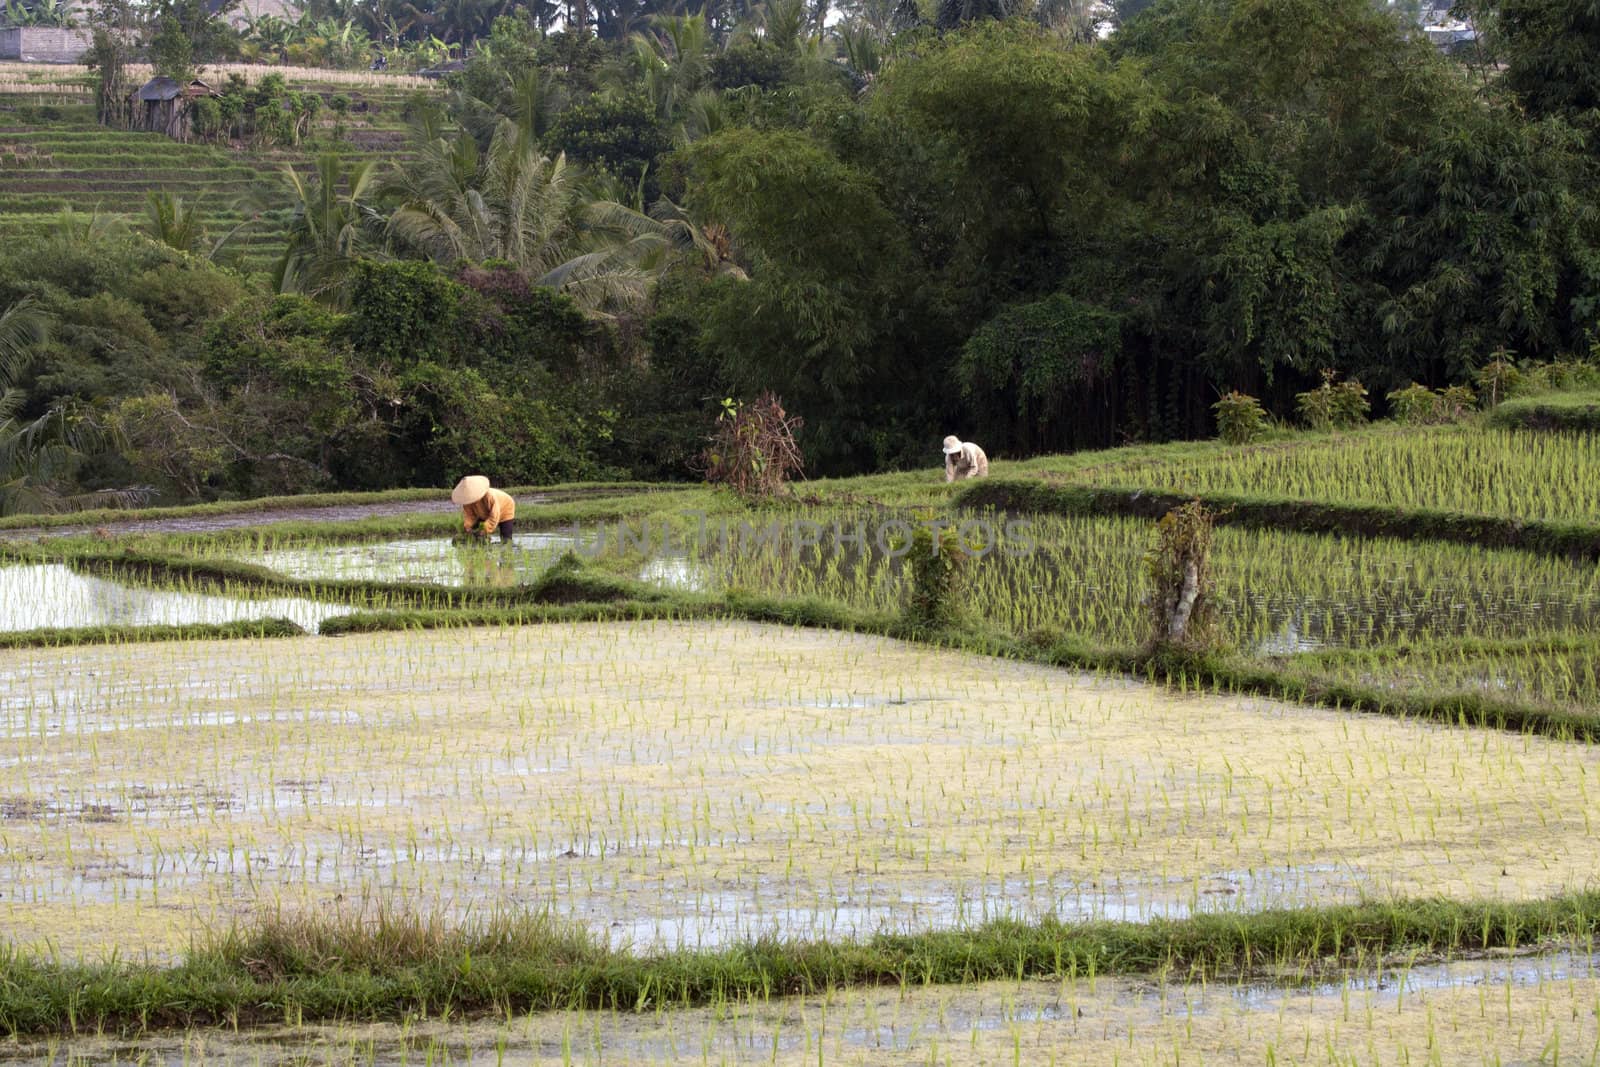 Workers in the rice fields, Bali